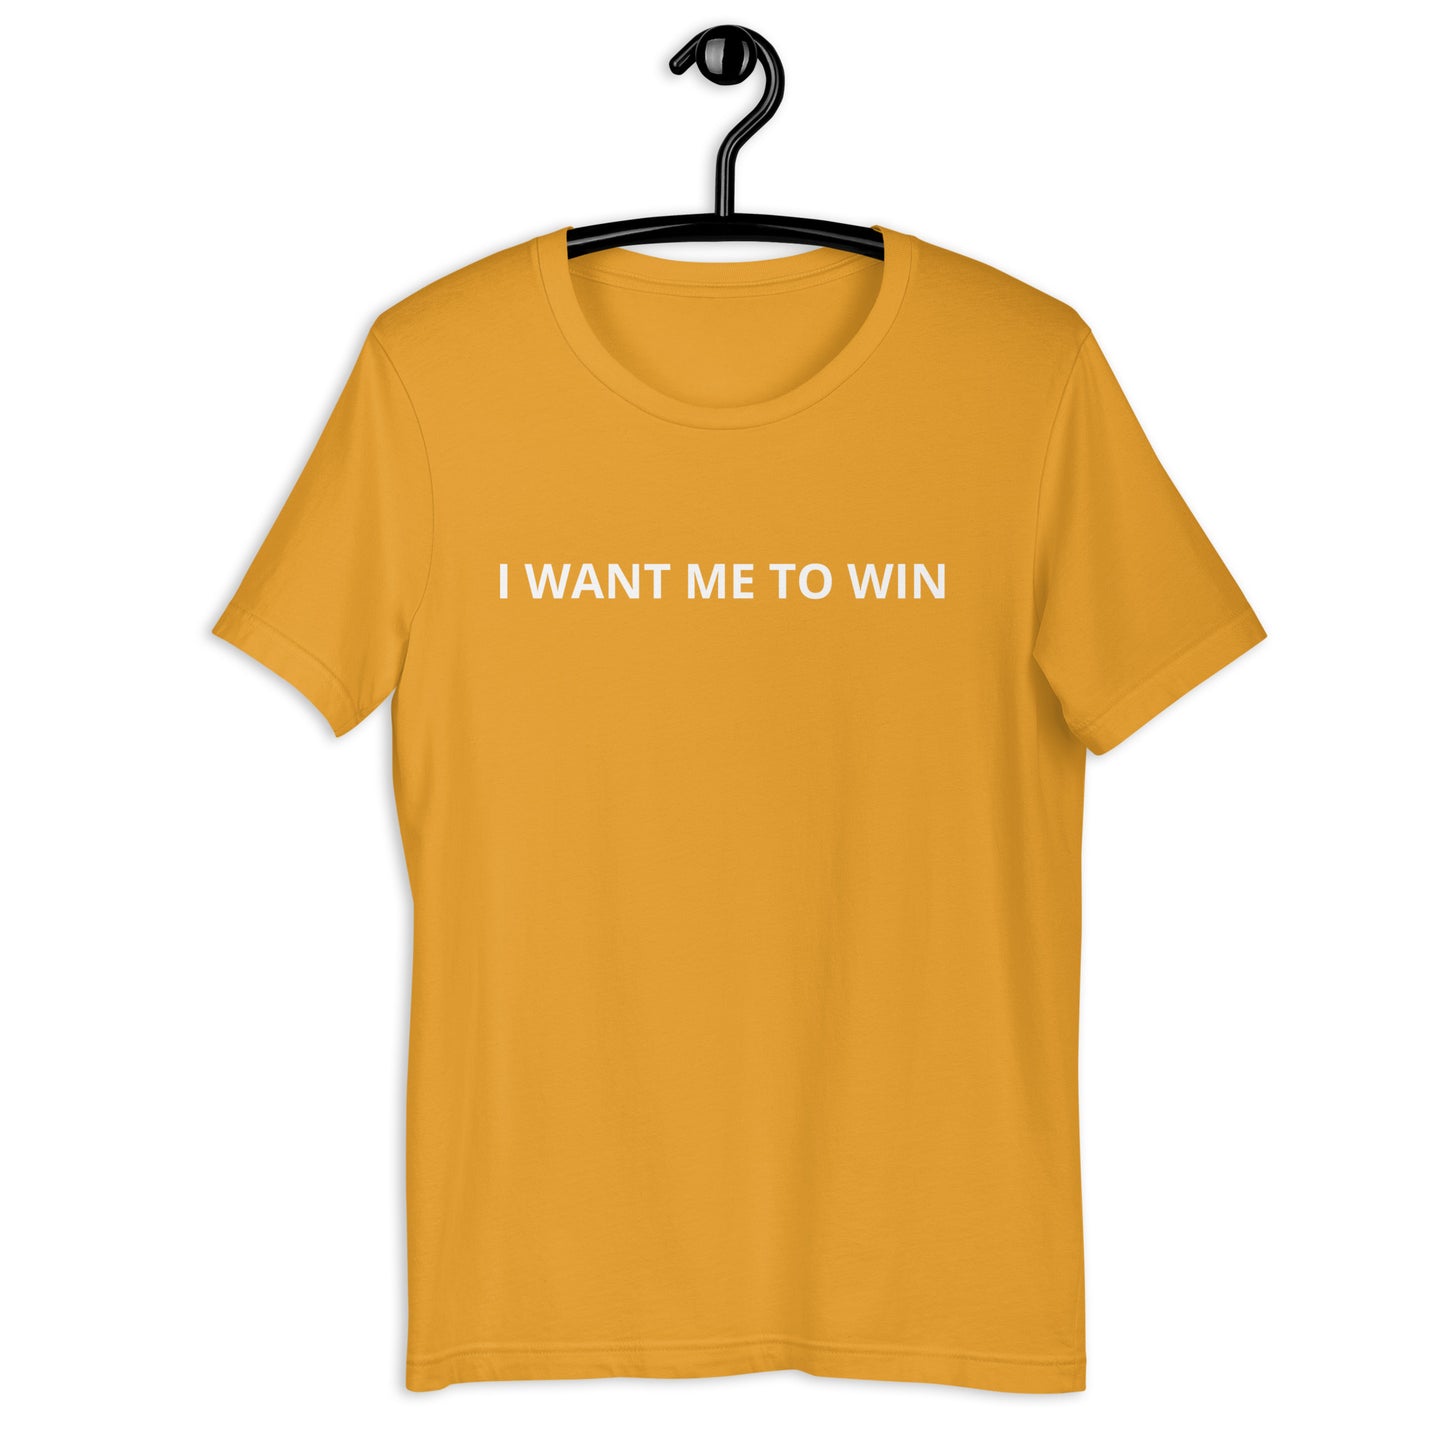 I WANT ME TO WIN  Unisex t-shirt